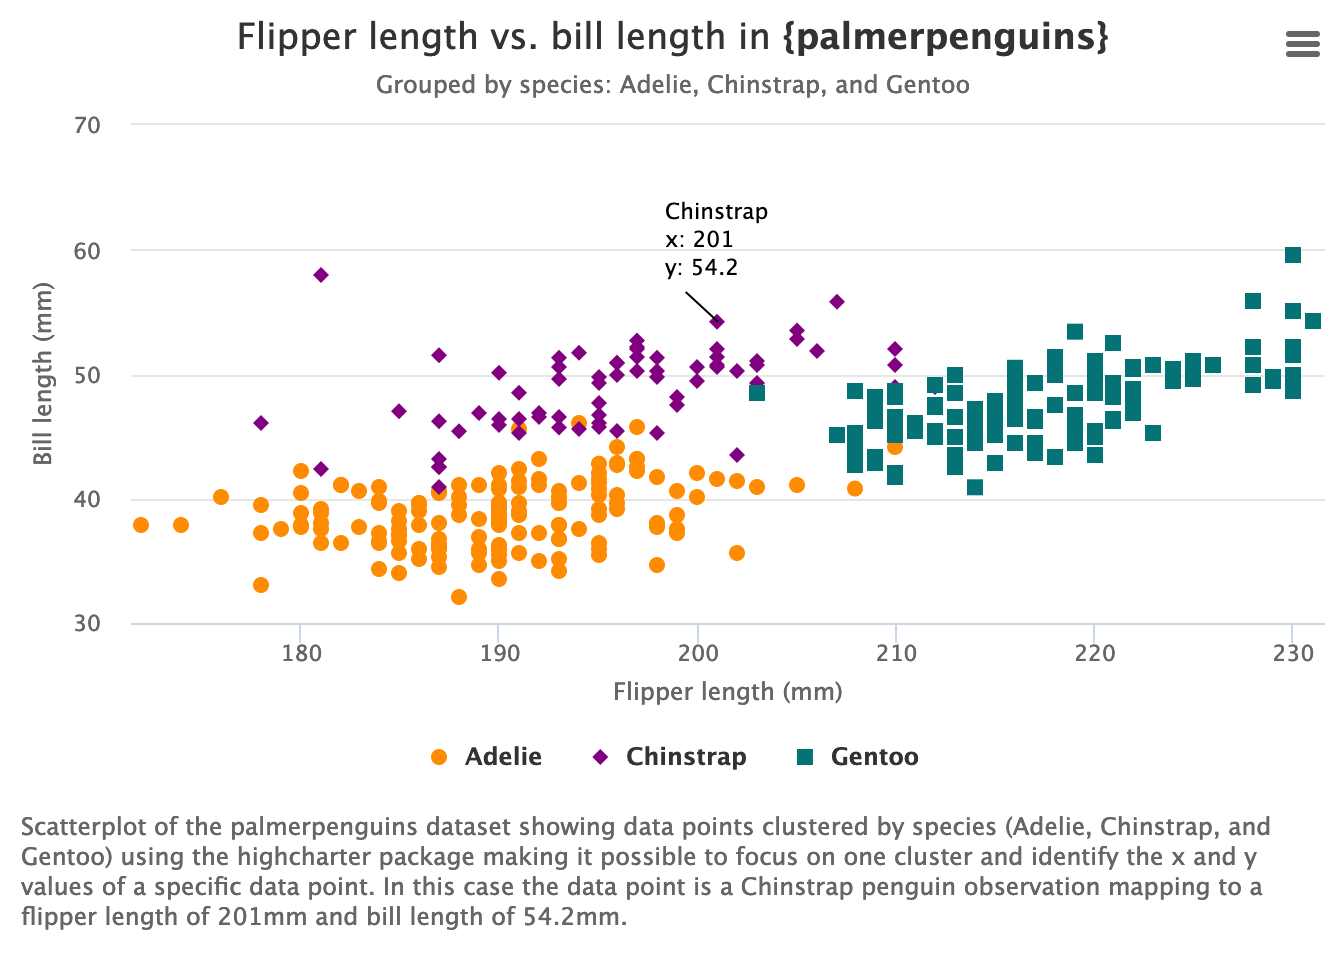 Scatterplot of the palmerpenguins dataset showing data points clustered by species and the highcharter package making it possible to focus on one cluster and identify the x and y values of a specific data point. In this case the data point is a Chinstrap penguin observation mapping to a flipper length of 201mm and bill length of 54.2mm. Explore this data viz with a screen reader in Mara's blog post: https://dataand.me/posts/2021-11-15-accessible-highcharter-part-4/#an-accessible-penguin-plot